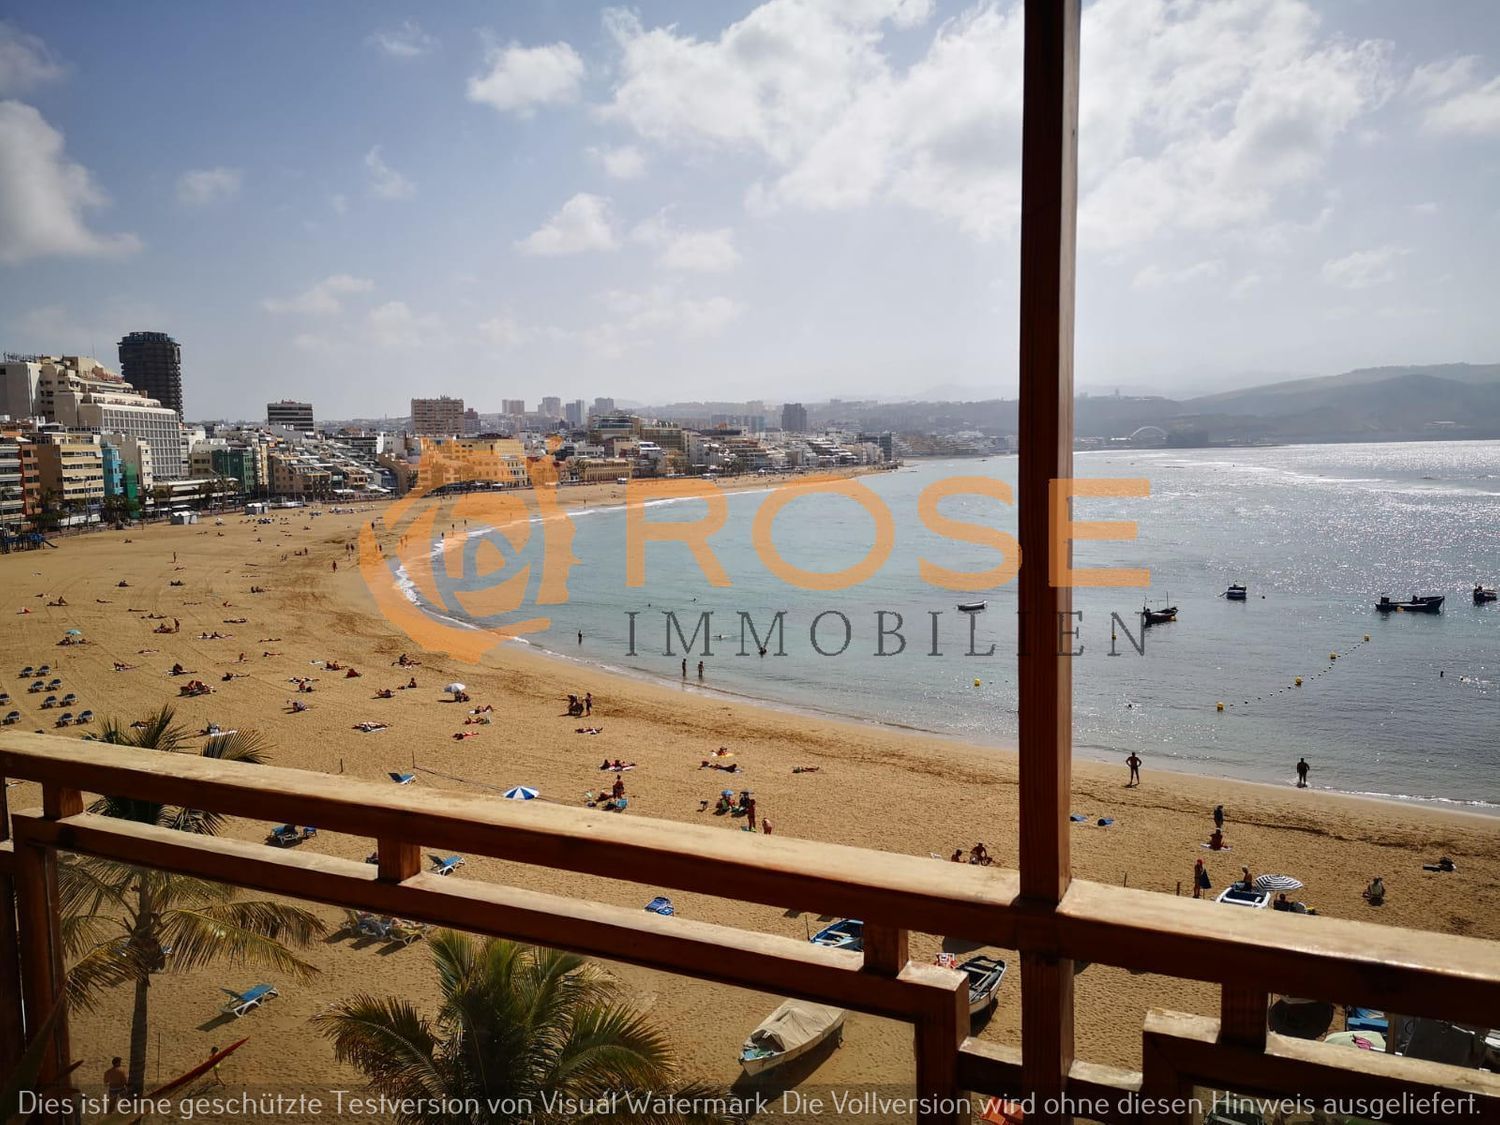 Flat for sale on the seafront in Calle Naval, Las Palmas de Gran Canaria